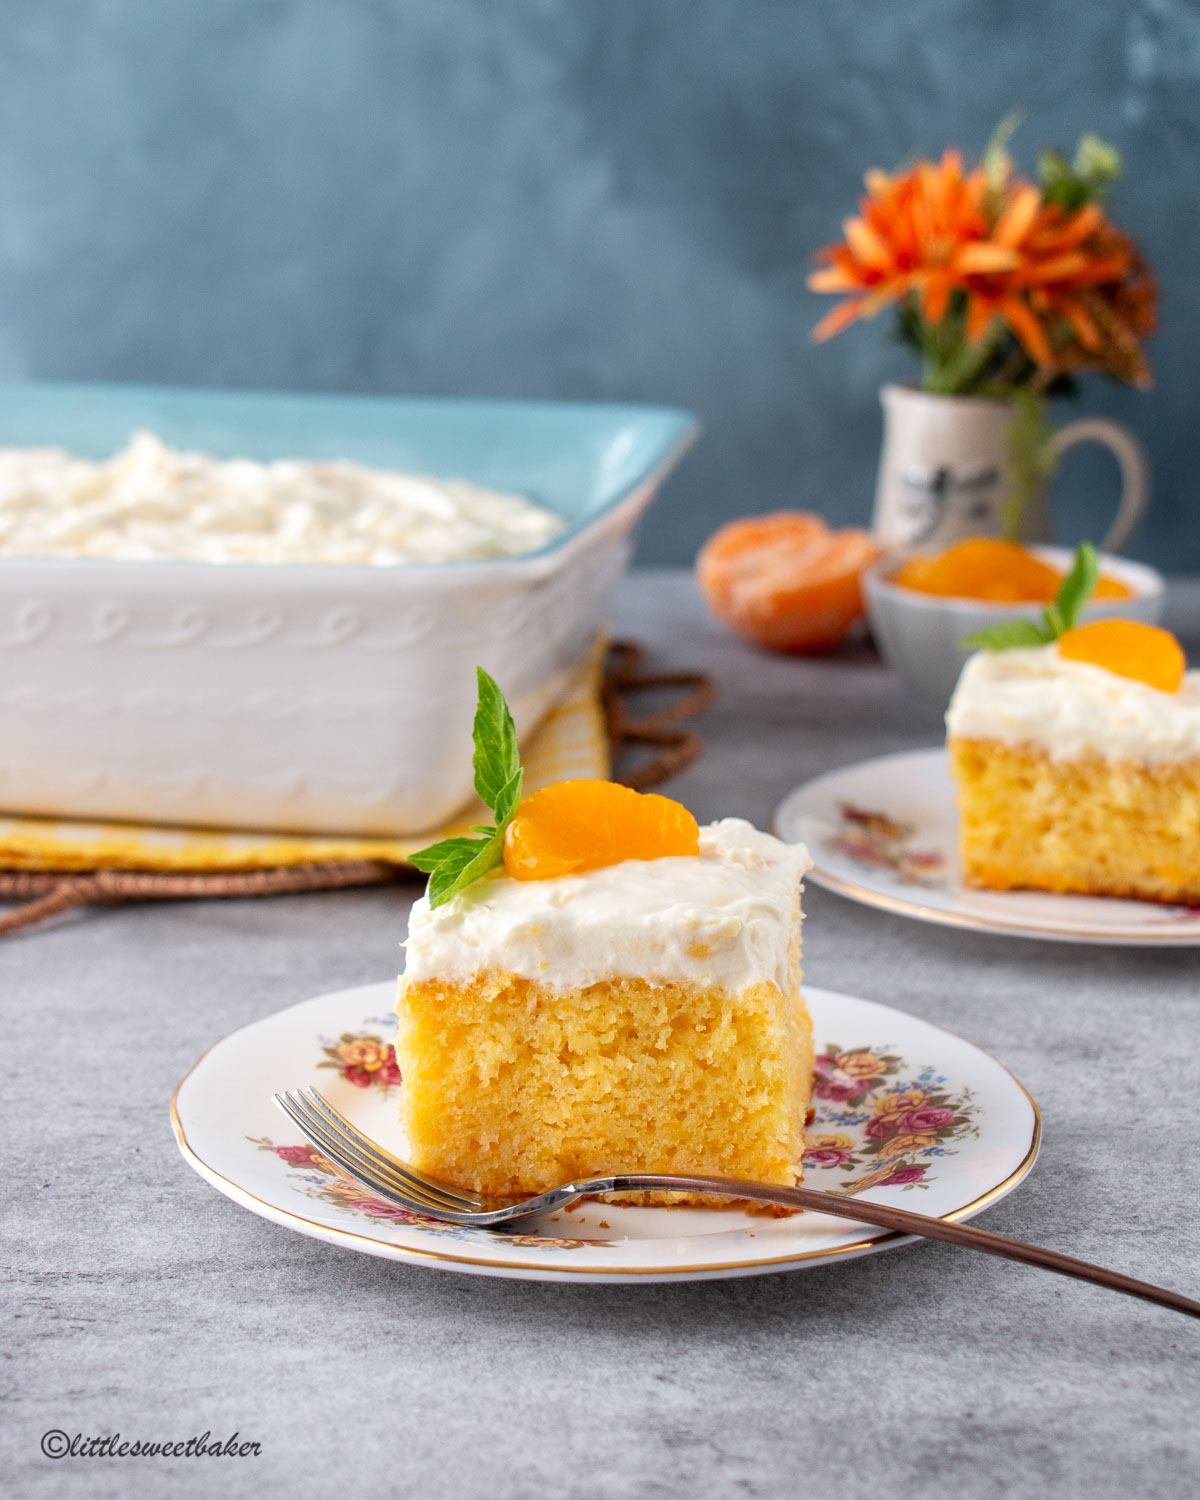 A slice of mandarin orange topped with pineapple frosting on a vintage plate.